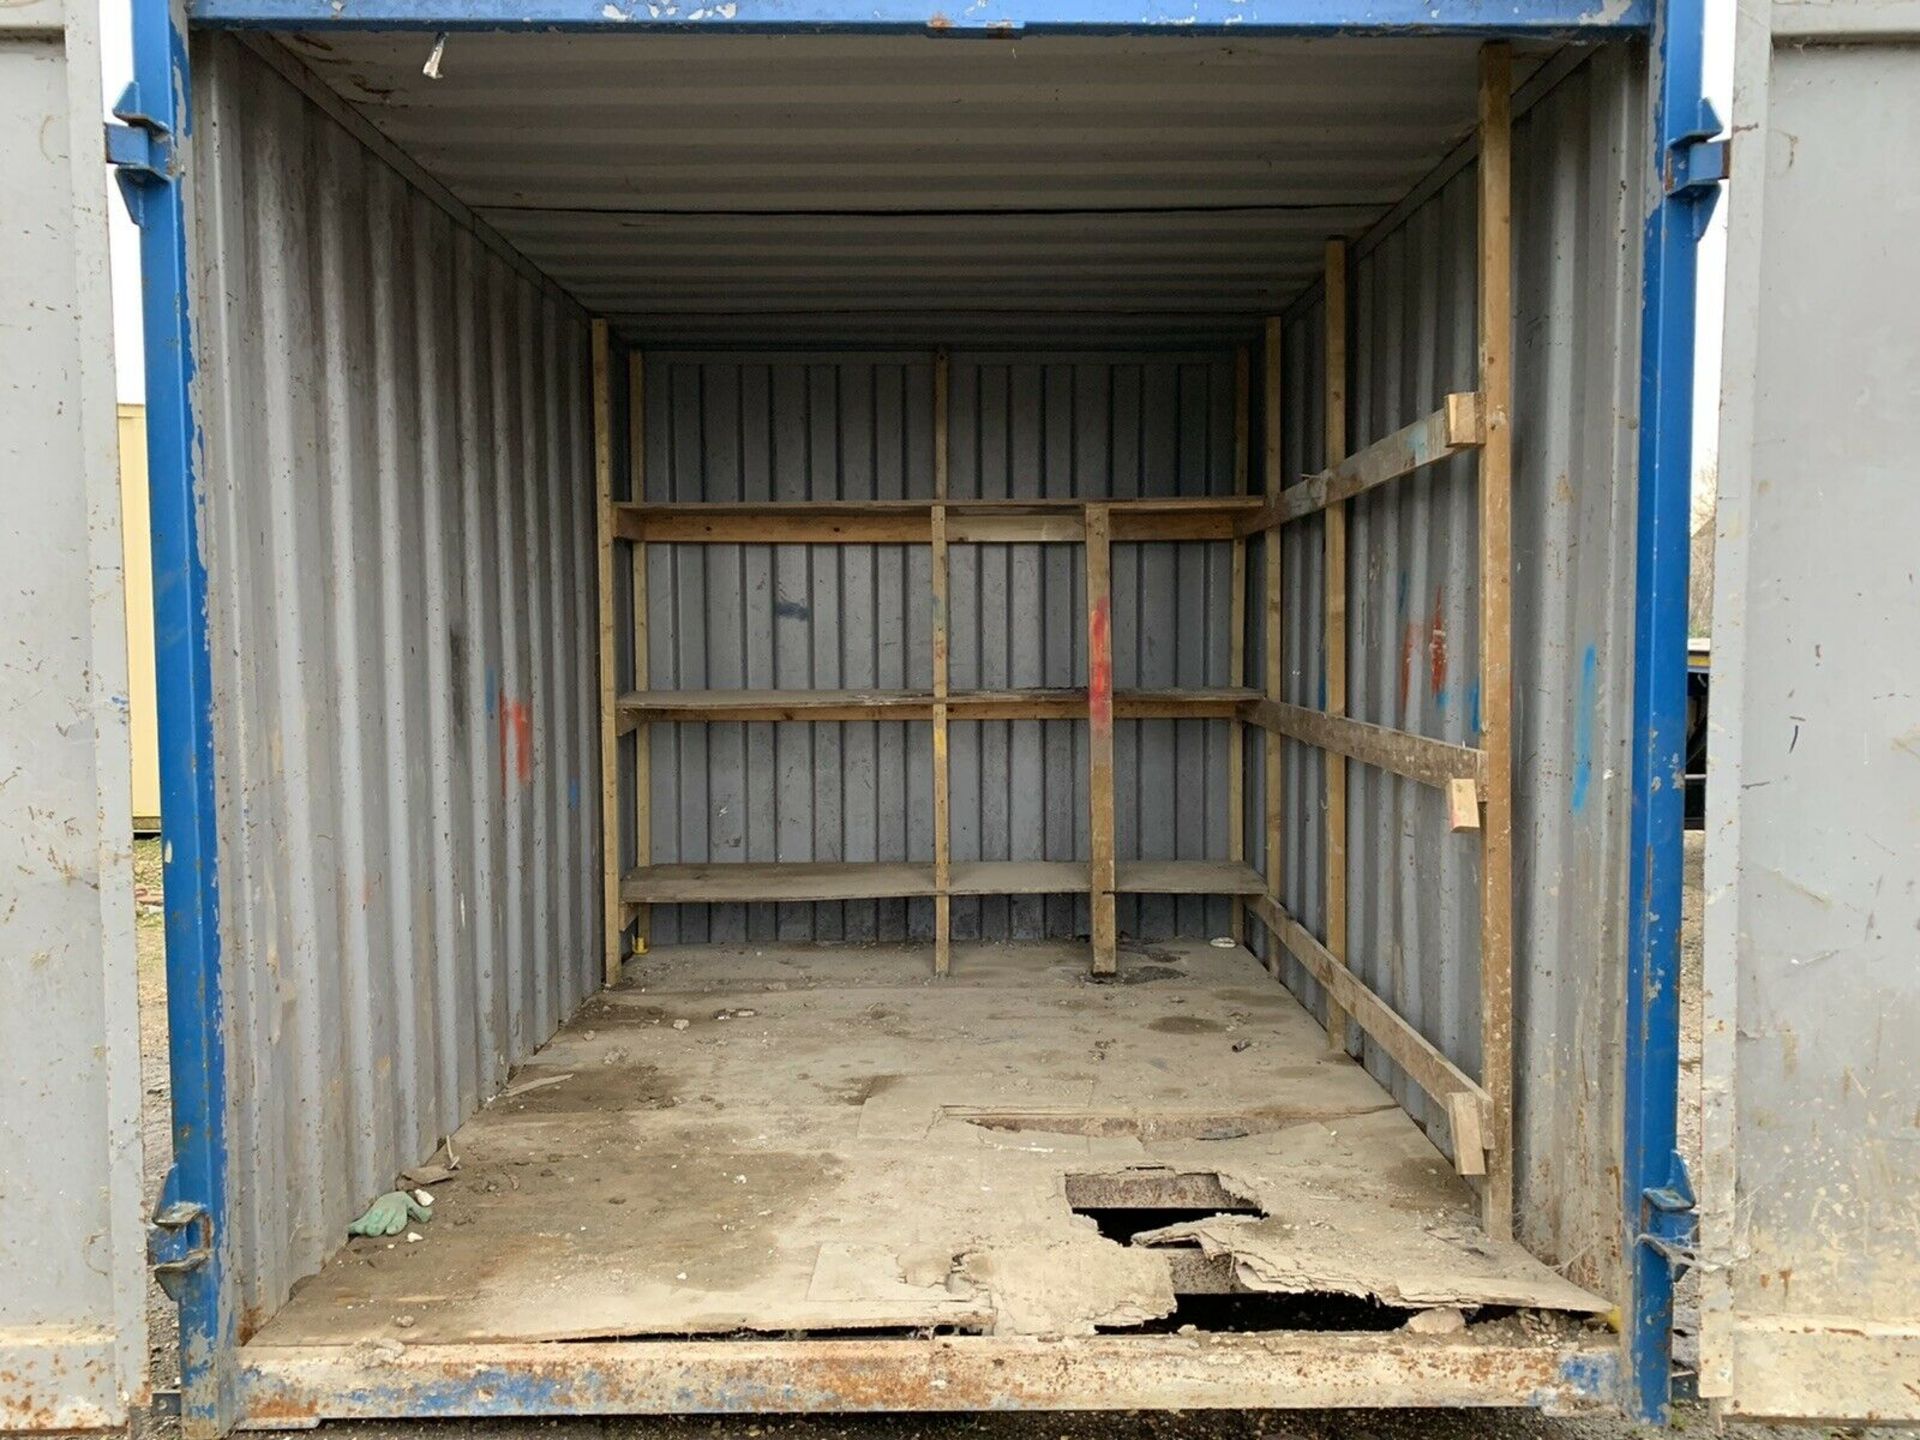 Office / Storage Container Anti Vandal Steel Portable Building 20ft x 8ft - Image 4 of 11